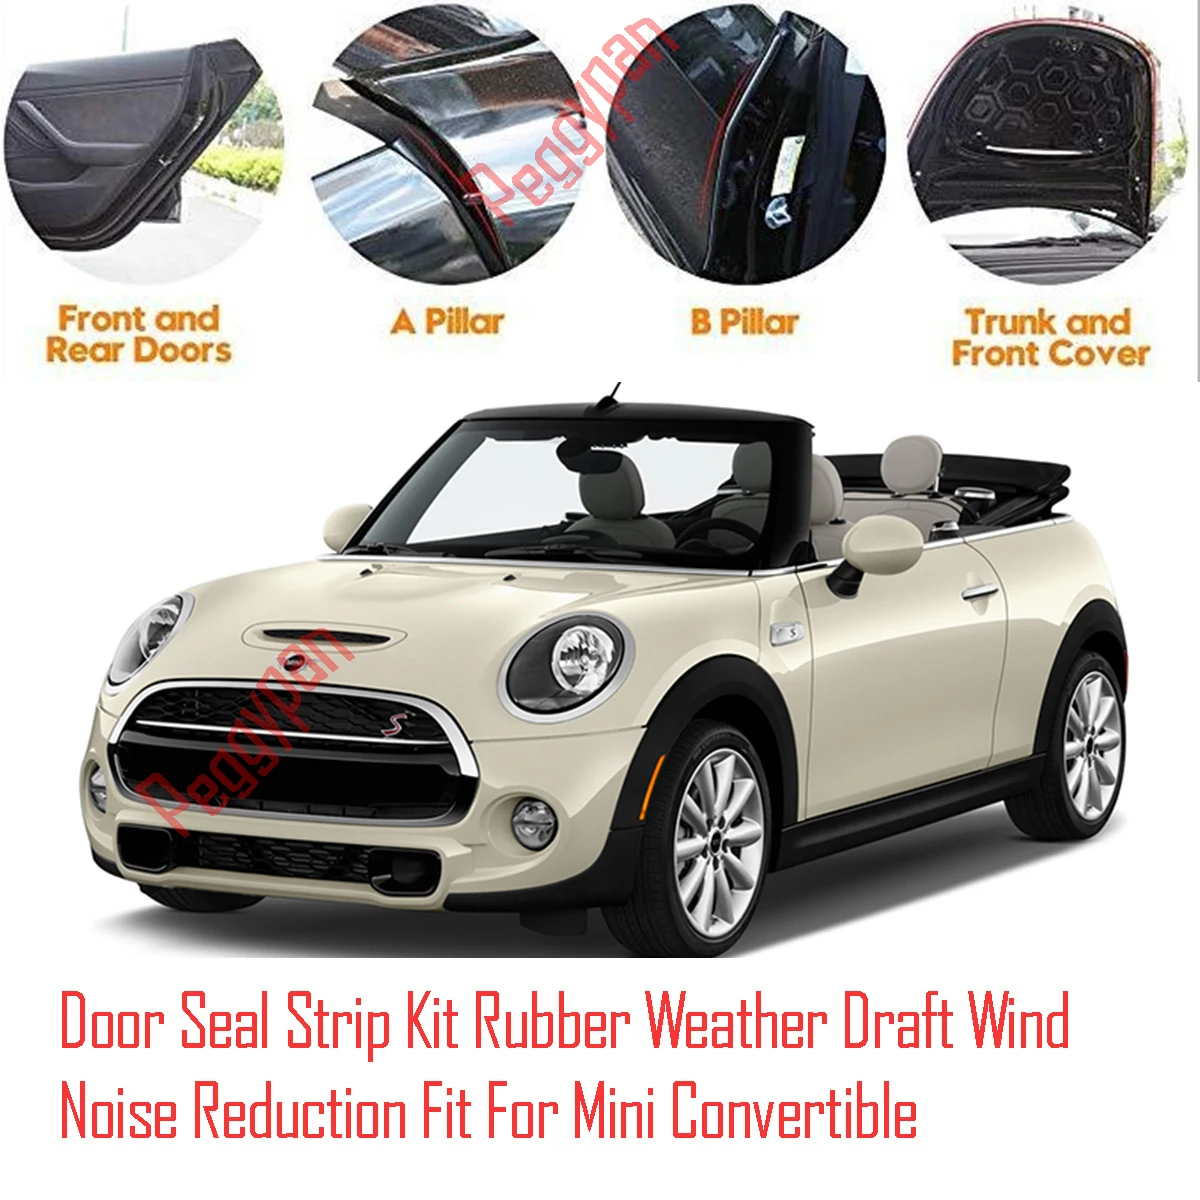 Door Seal Strip Kit Self Adhesive Window Engine Cover Soundproof Rubber Weather Draft Wind Noise Reduction Fit Mini Convertible